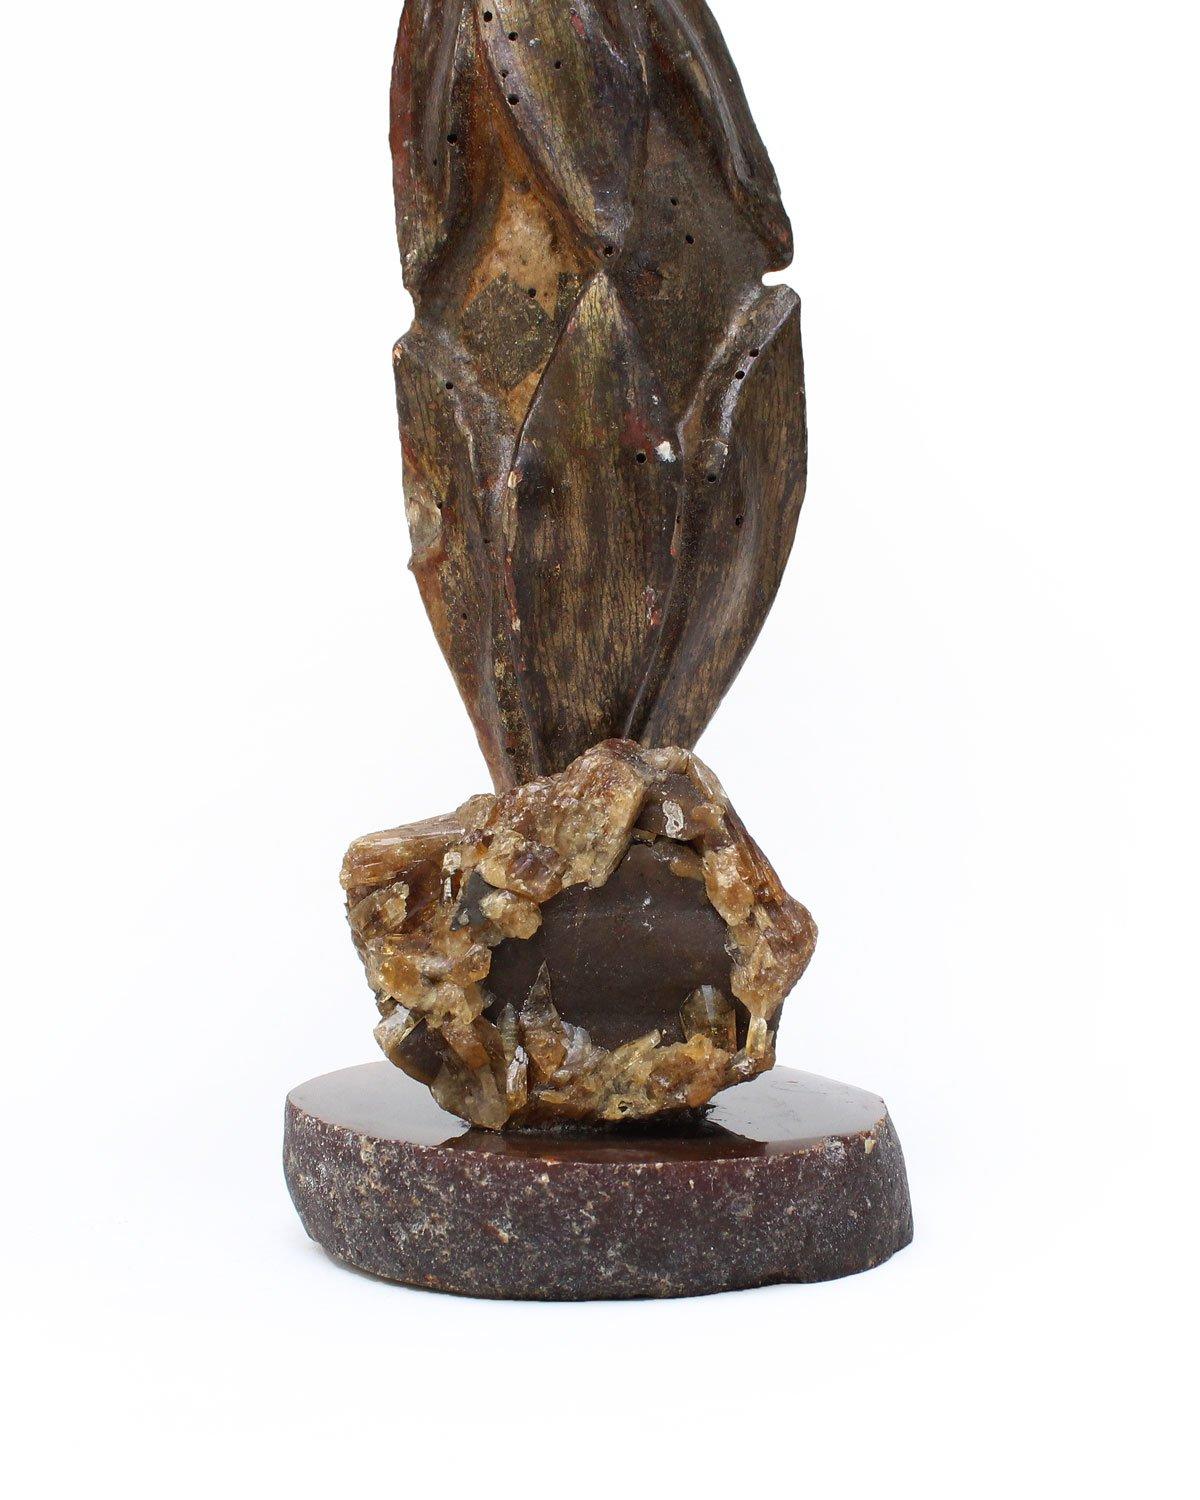 18th century Italian leaf fragment with a natural forming baroque pearl and barite crystals on barite in matrix and polished agate base. The crystals have encrusted themselves around the matrix, forming an organic sculpture in its own right. These